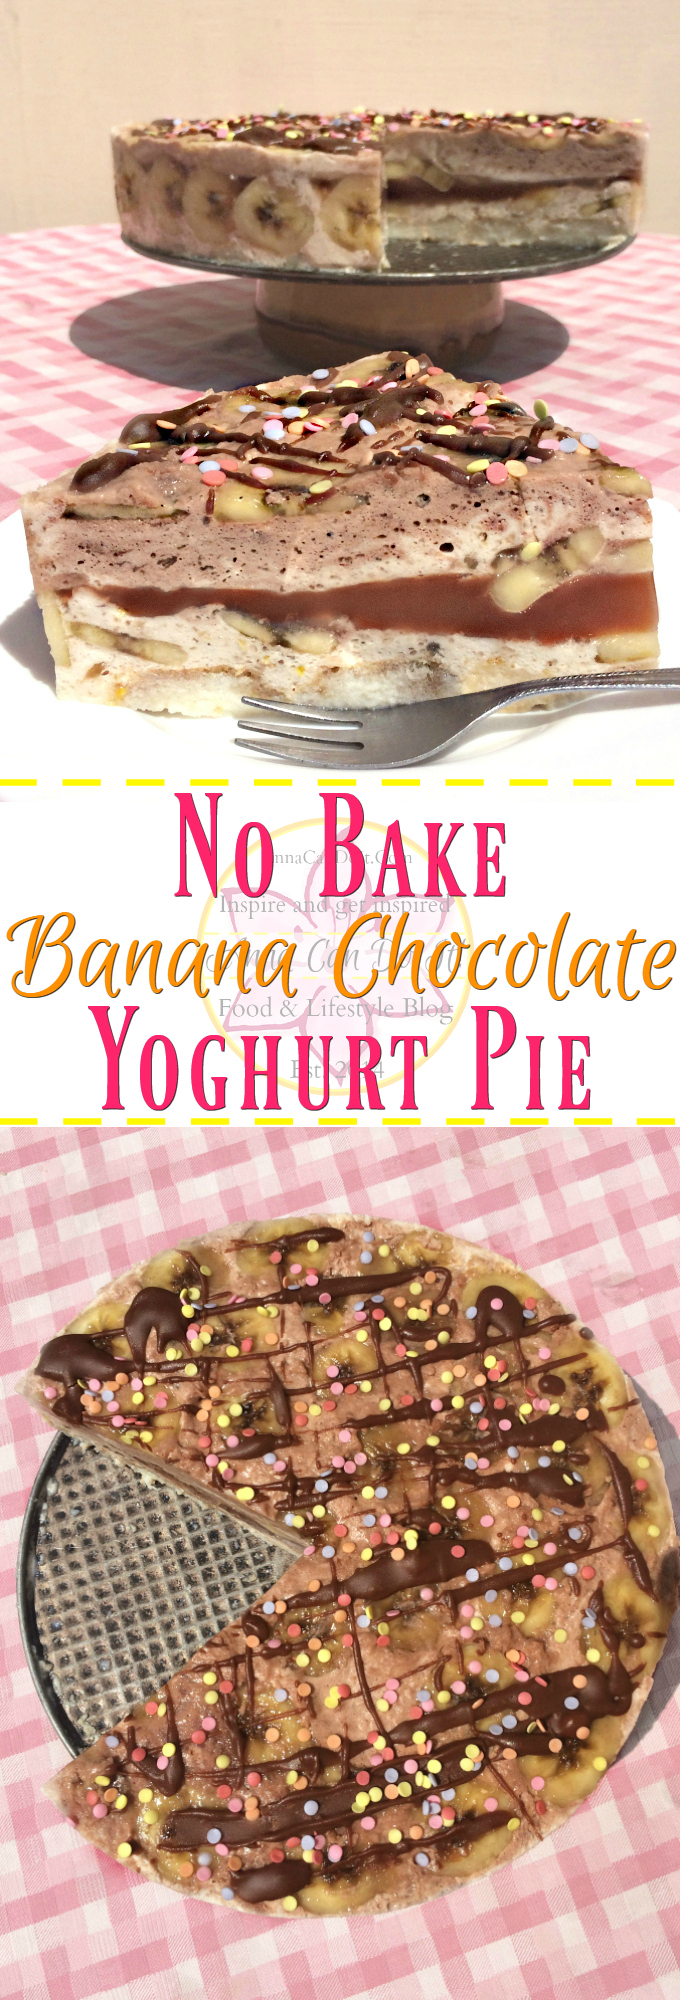 No Bake Banana Chocolate Yoghurt Pie - Anna Can Do It! - No Bake Banana Chocolate Yoghurt Pie is the perfect summer dessert! It's light, refeshing, just sweet enough with the combination of banana and chocolate.